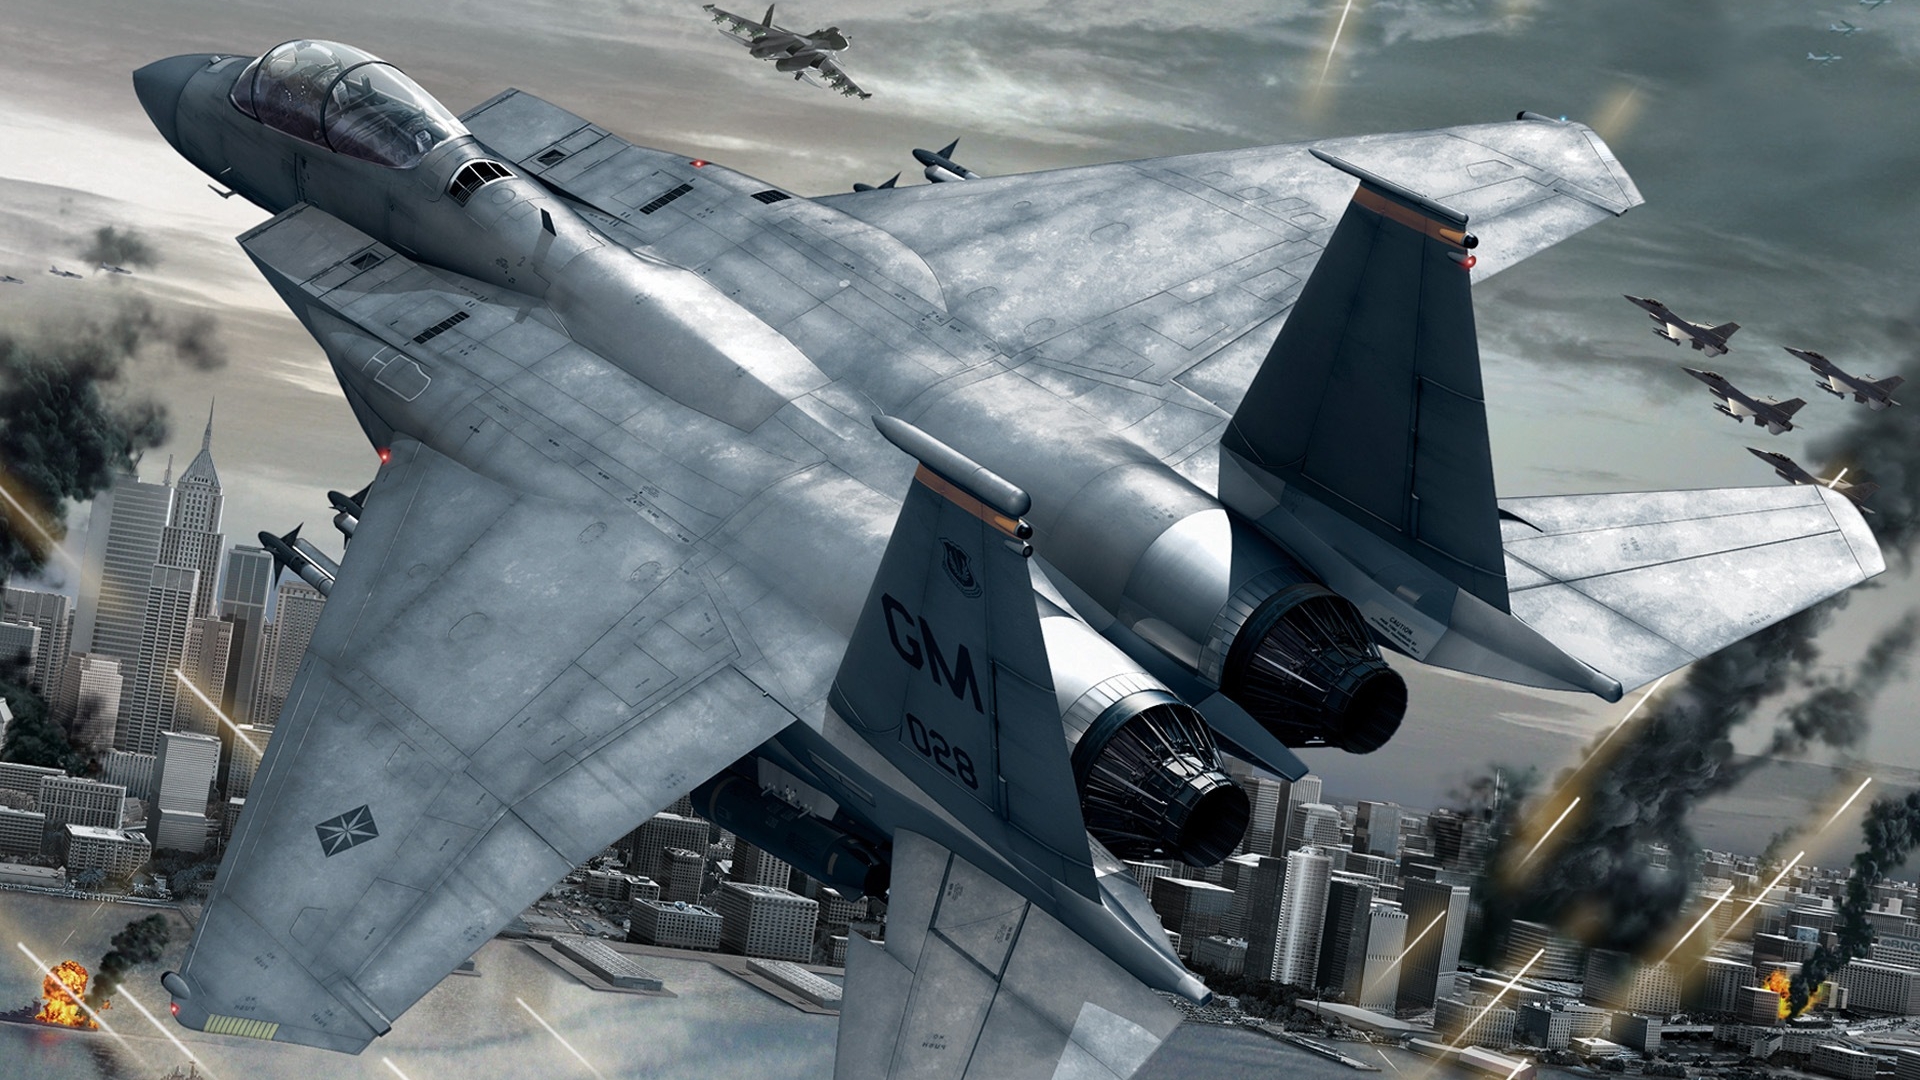 ace, Combat, Game, Jet, Airplane, Aircraft, Fighter, Plane, Military, Battle Wallpaper